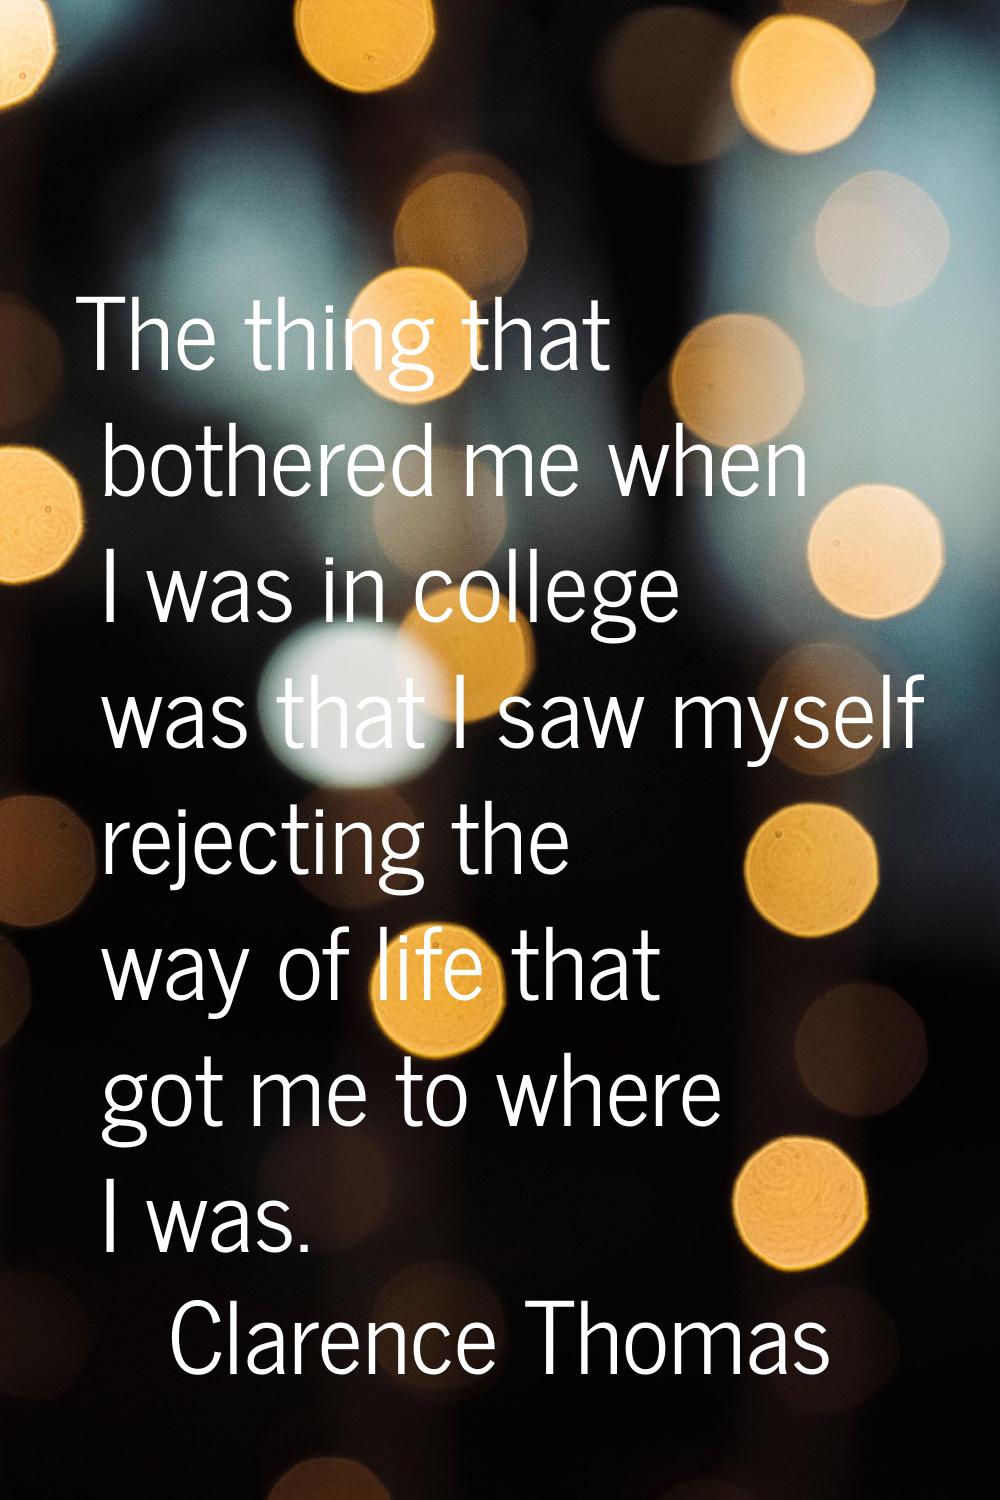 The thing that bothered me when I was in college was that I saw myself rejecting the way of life th